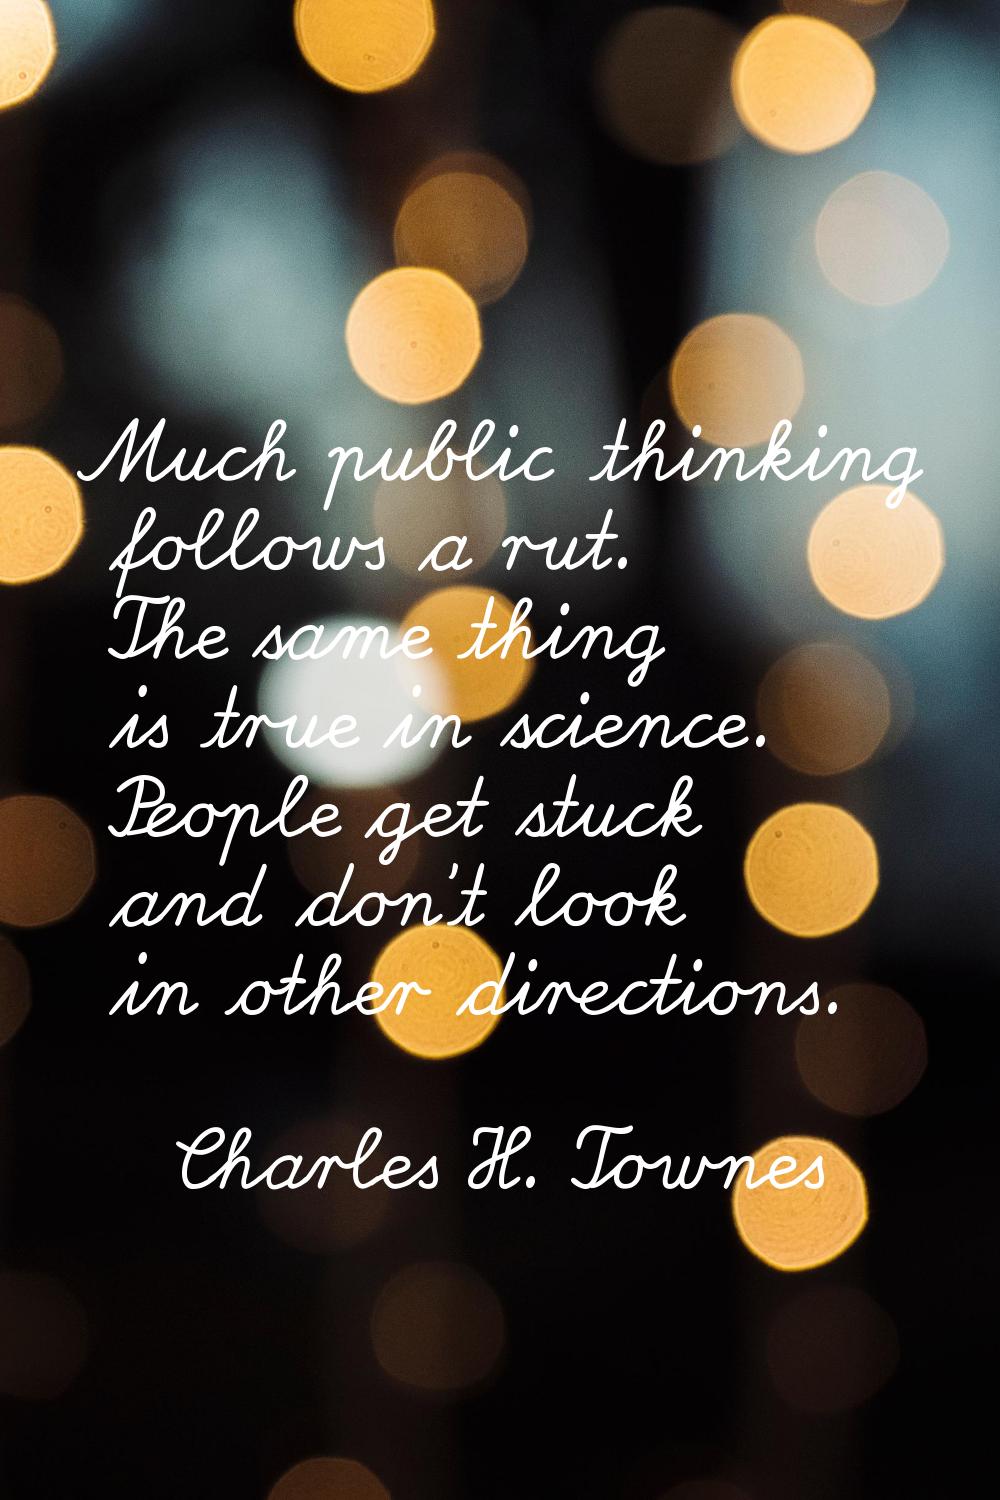 Much public thinking follows a rut. The same thing is true in science. People get stuck and don't l